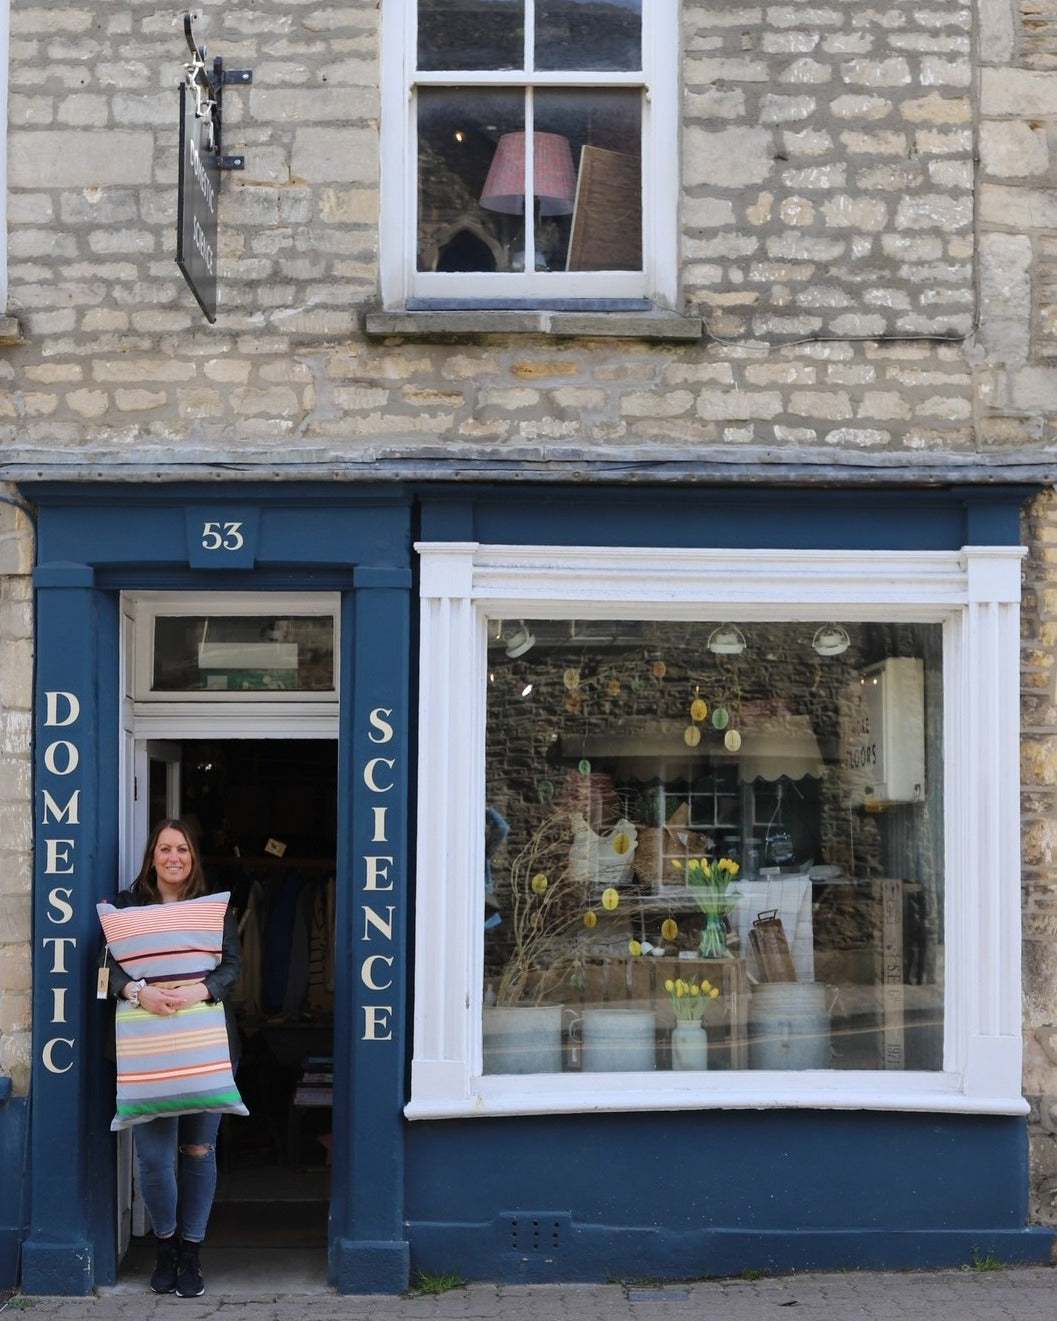 Domestic Science Shop front Tetbury Gloucestershire